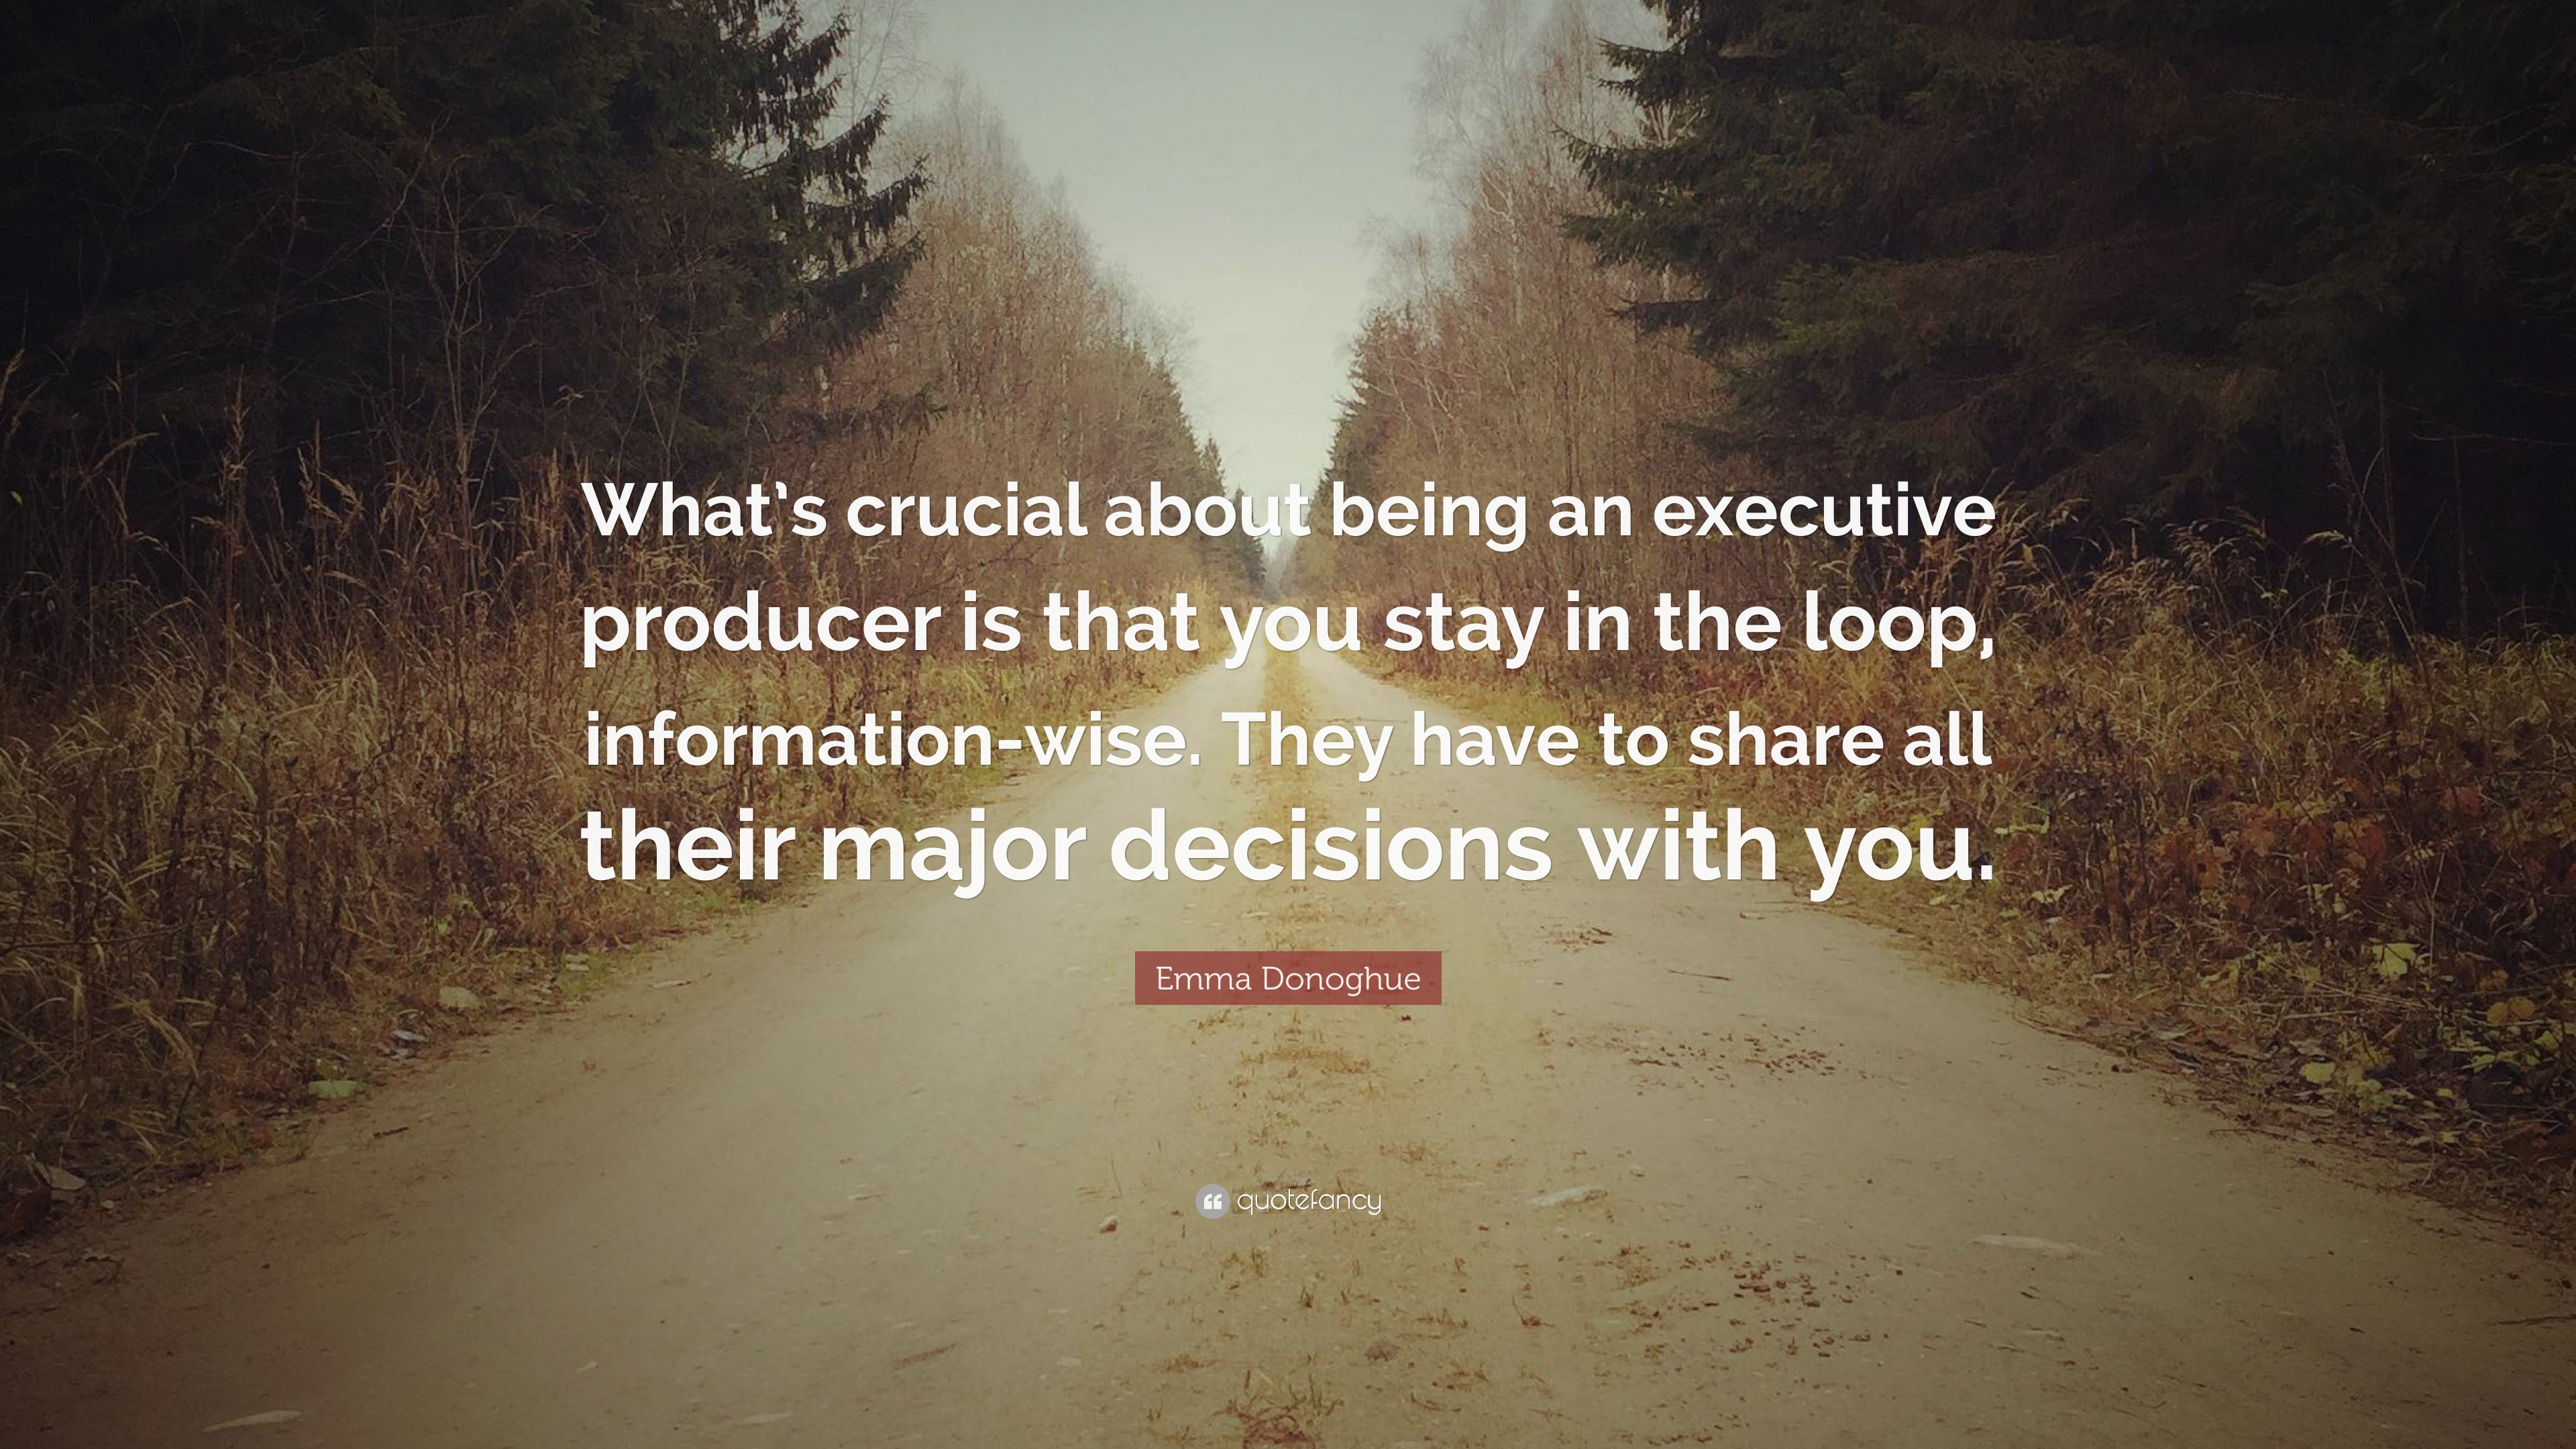 Emma Donoghue Quote: "What's crucial about being an executive producer is that you stay in the ...